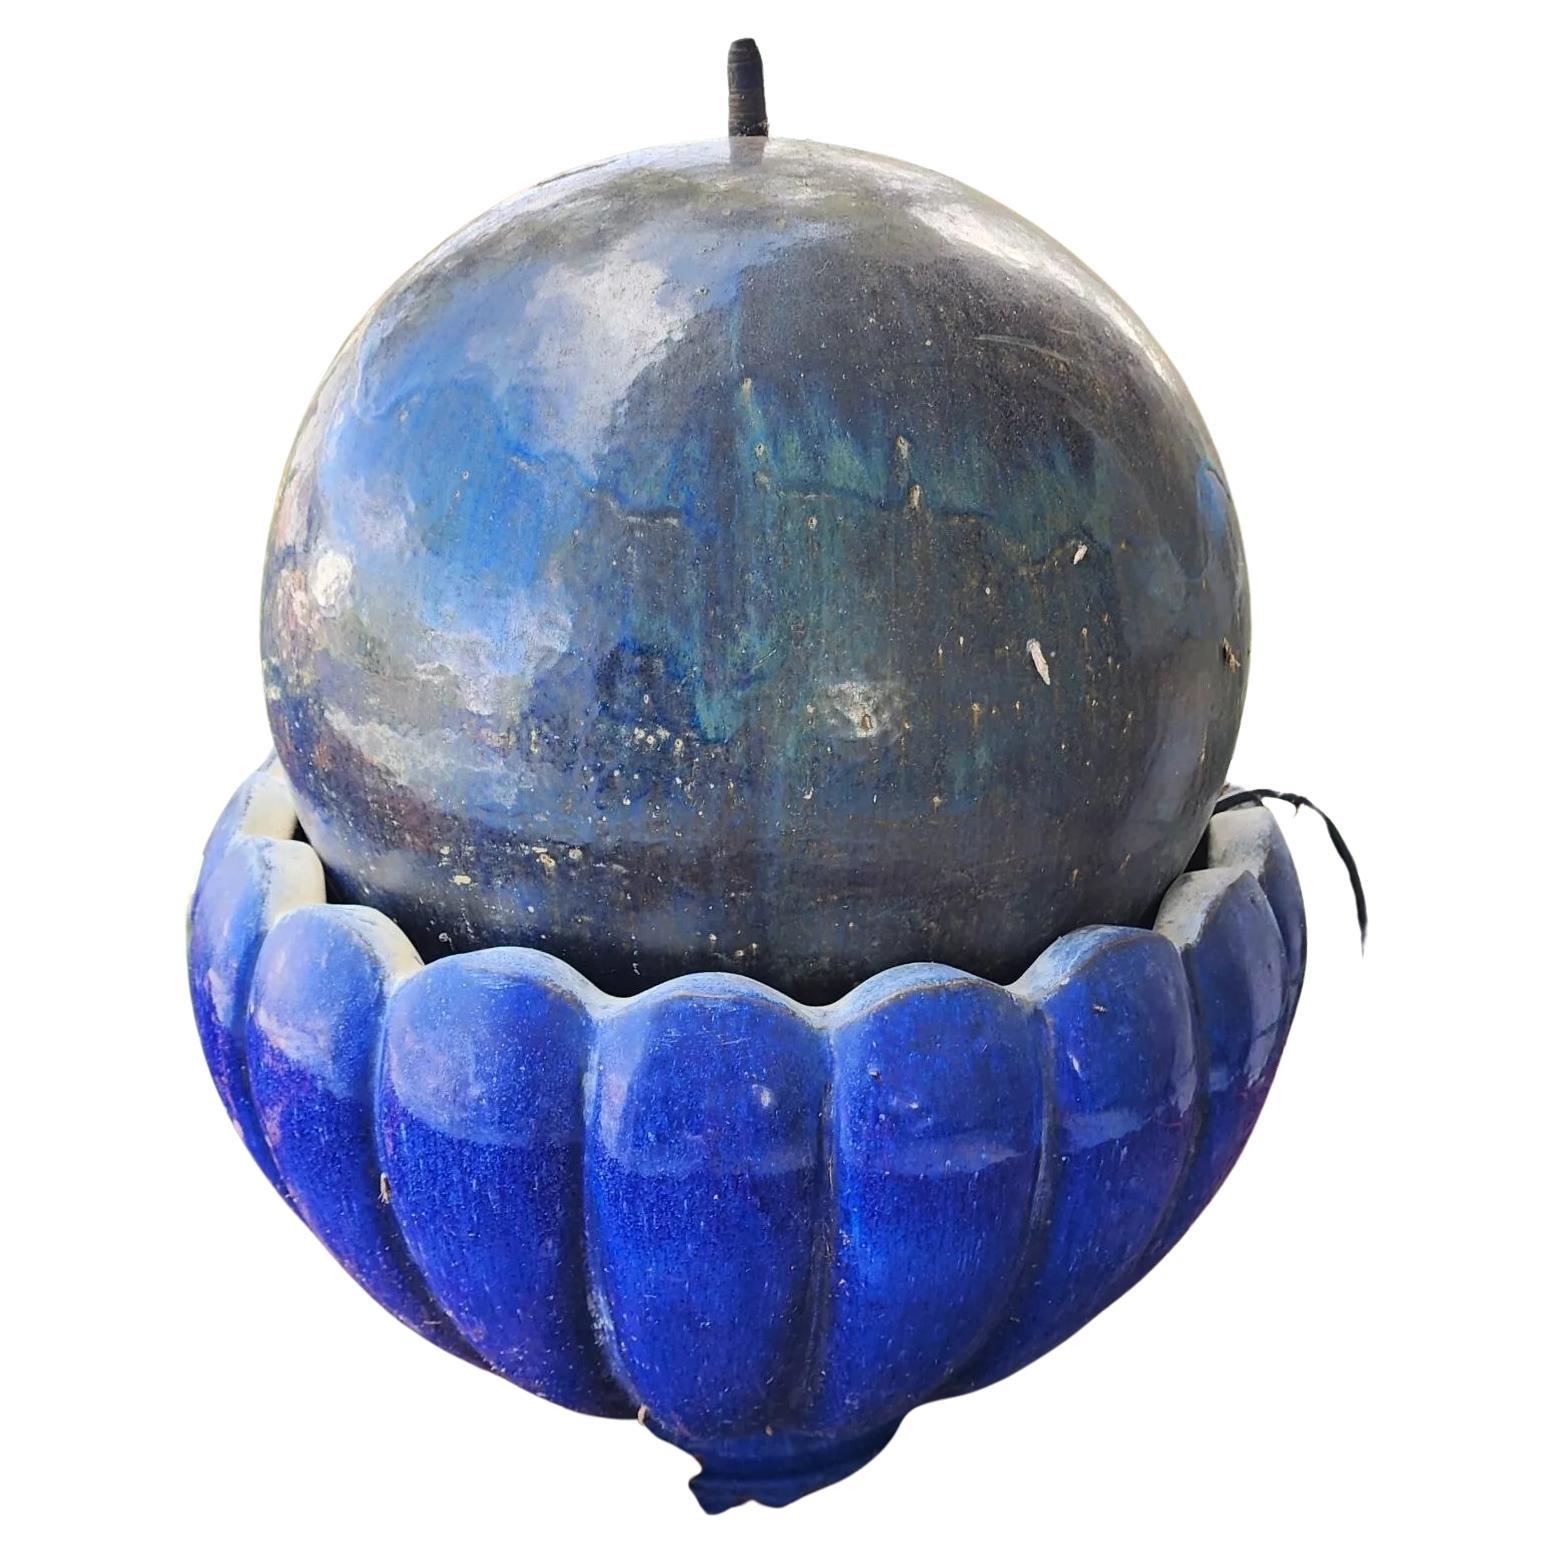 Huge Vintage Ceramic Ball Water Fountain For Sale